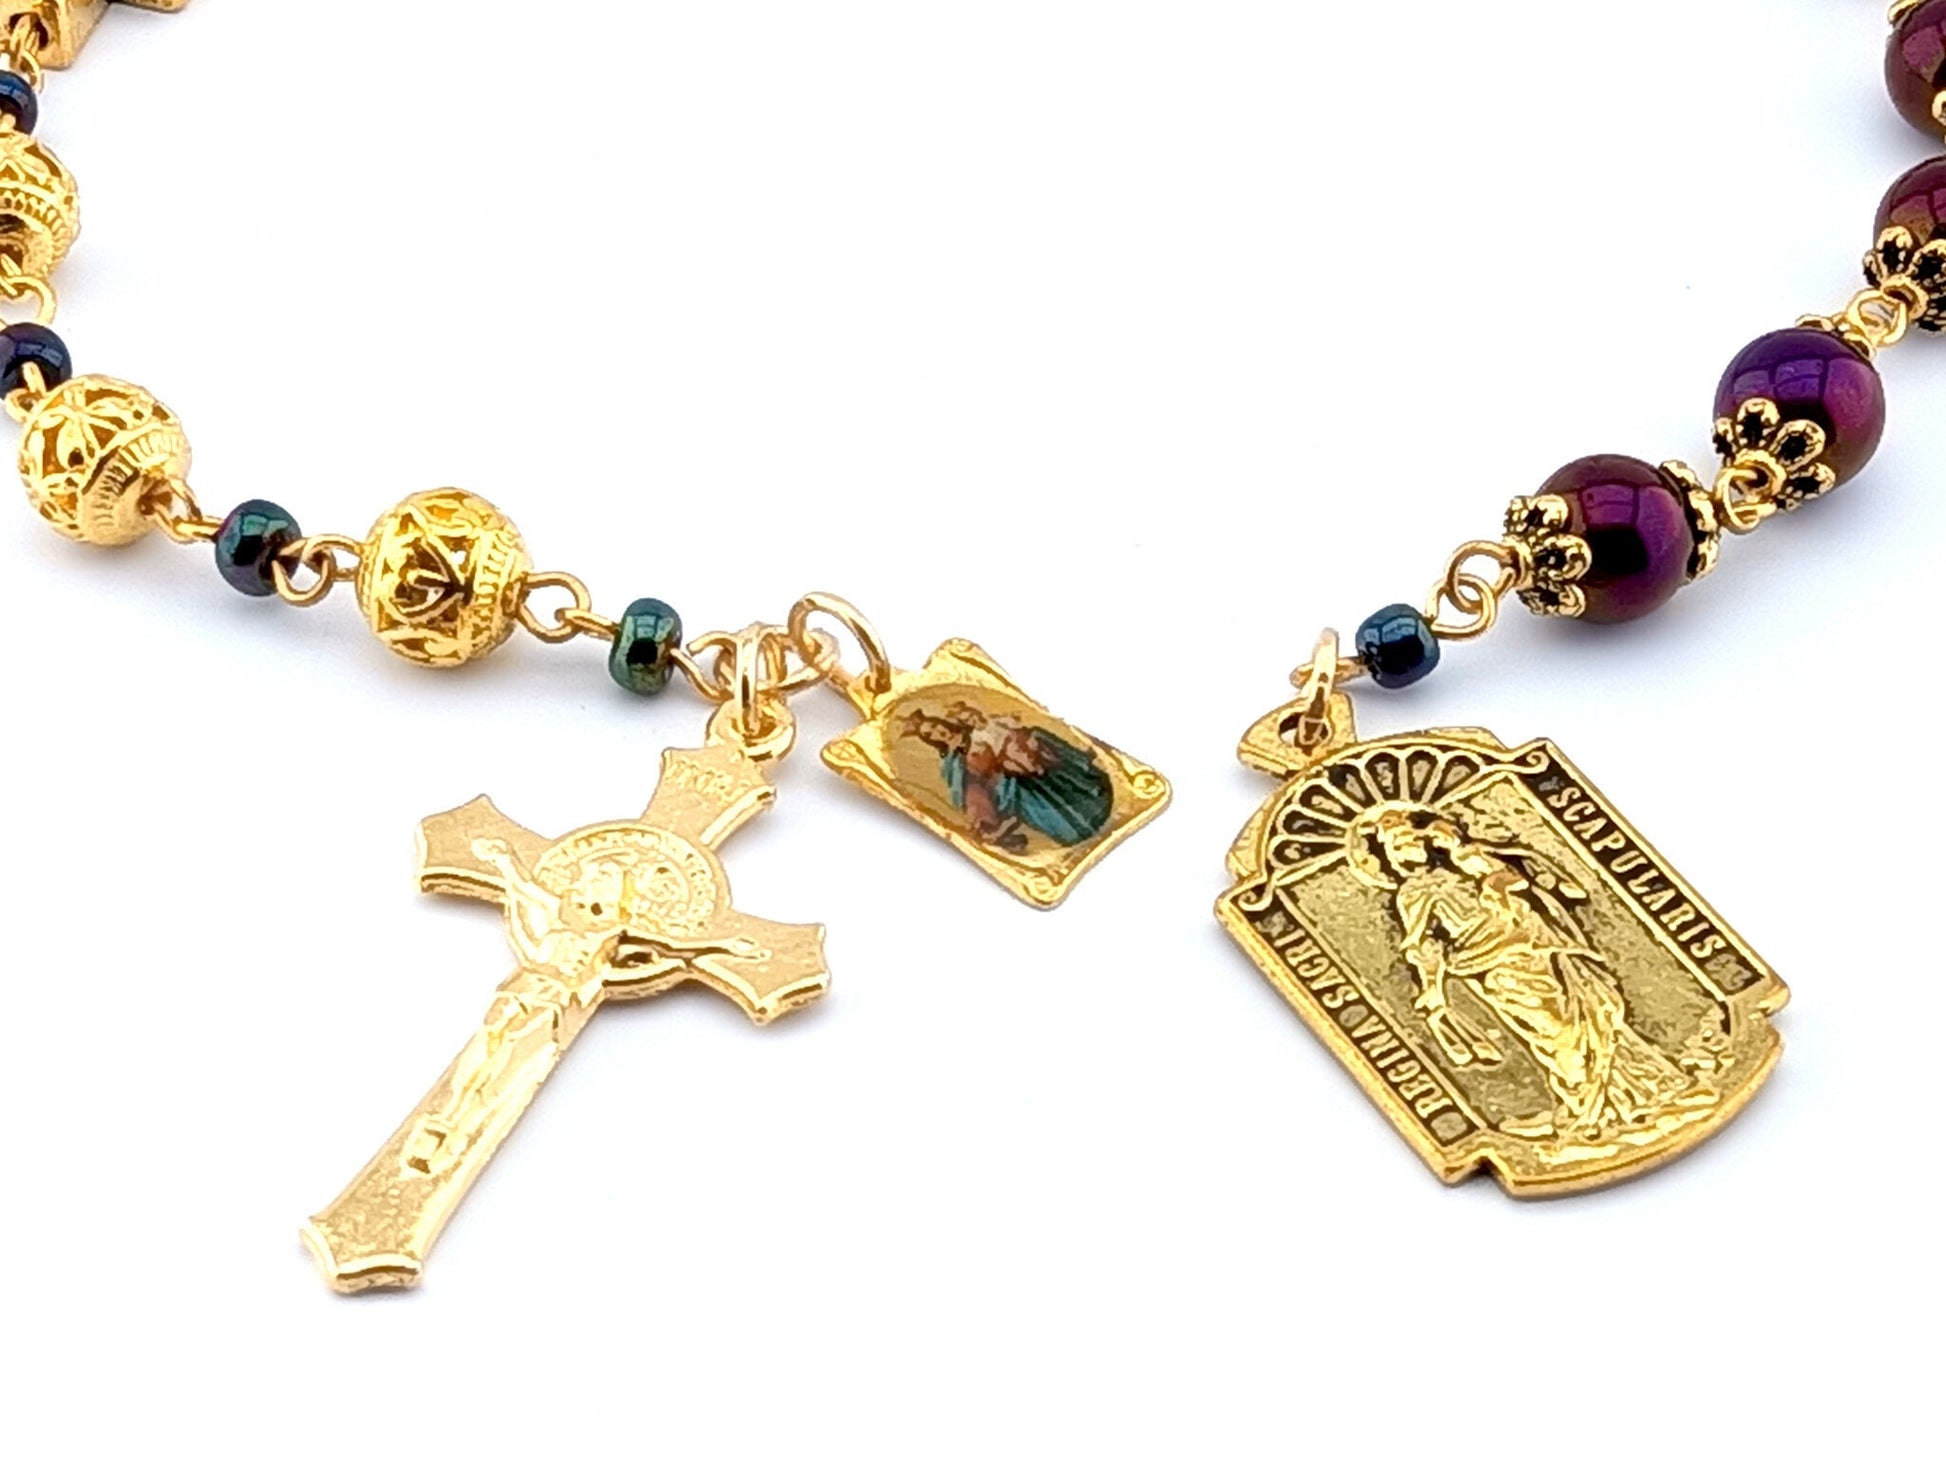 Our Lady of Sorrows unique rosary beads single servite dolor rosary with purple agate and golden beads, crucifix and Our Lady of Mount Carmel medals.